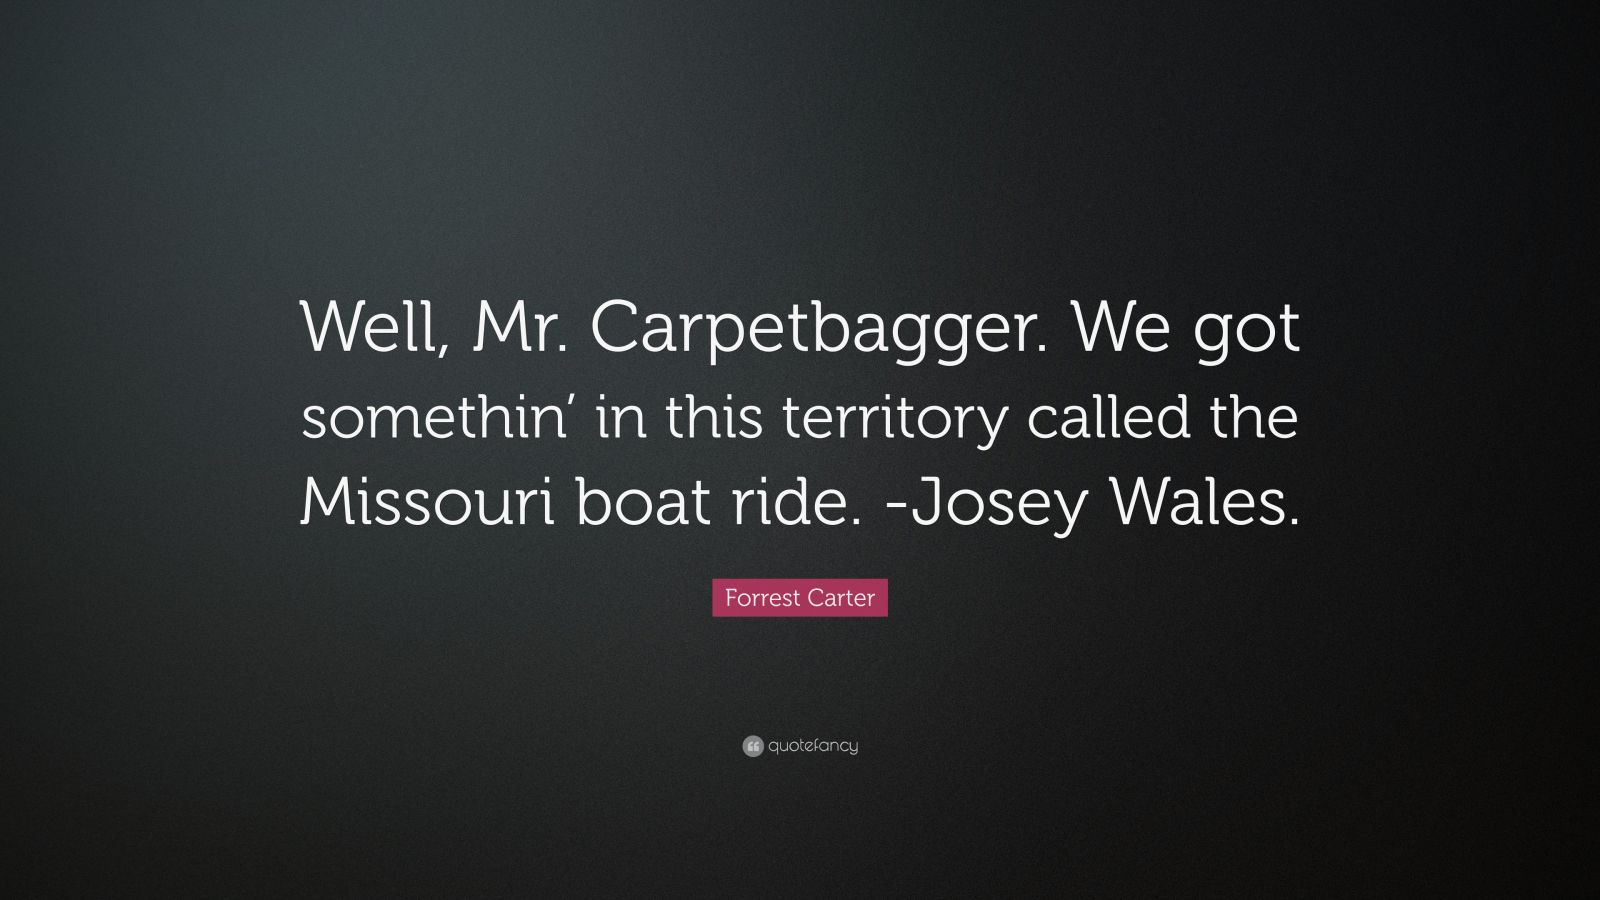 Forrest Carter Quote: “Well, Mr. Carpetbagger. We got somethin' in ...